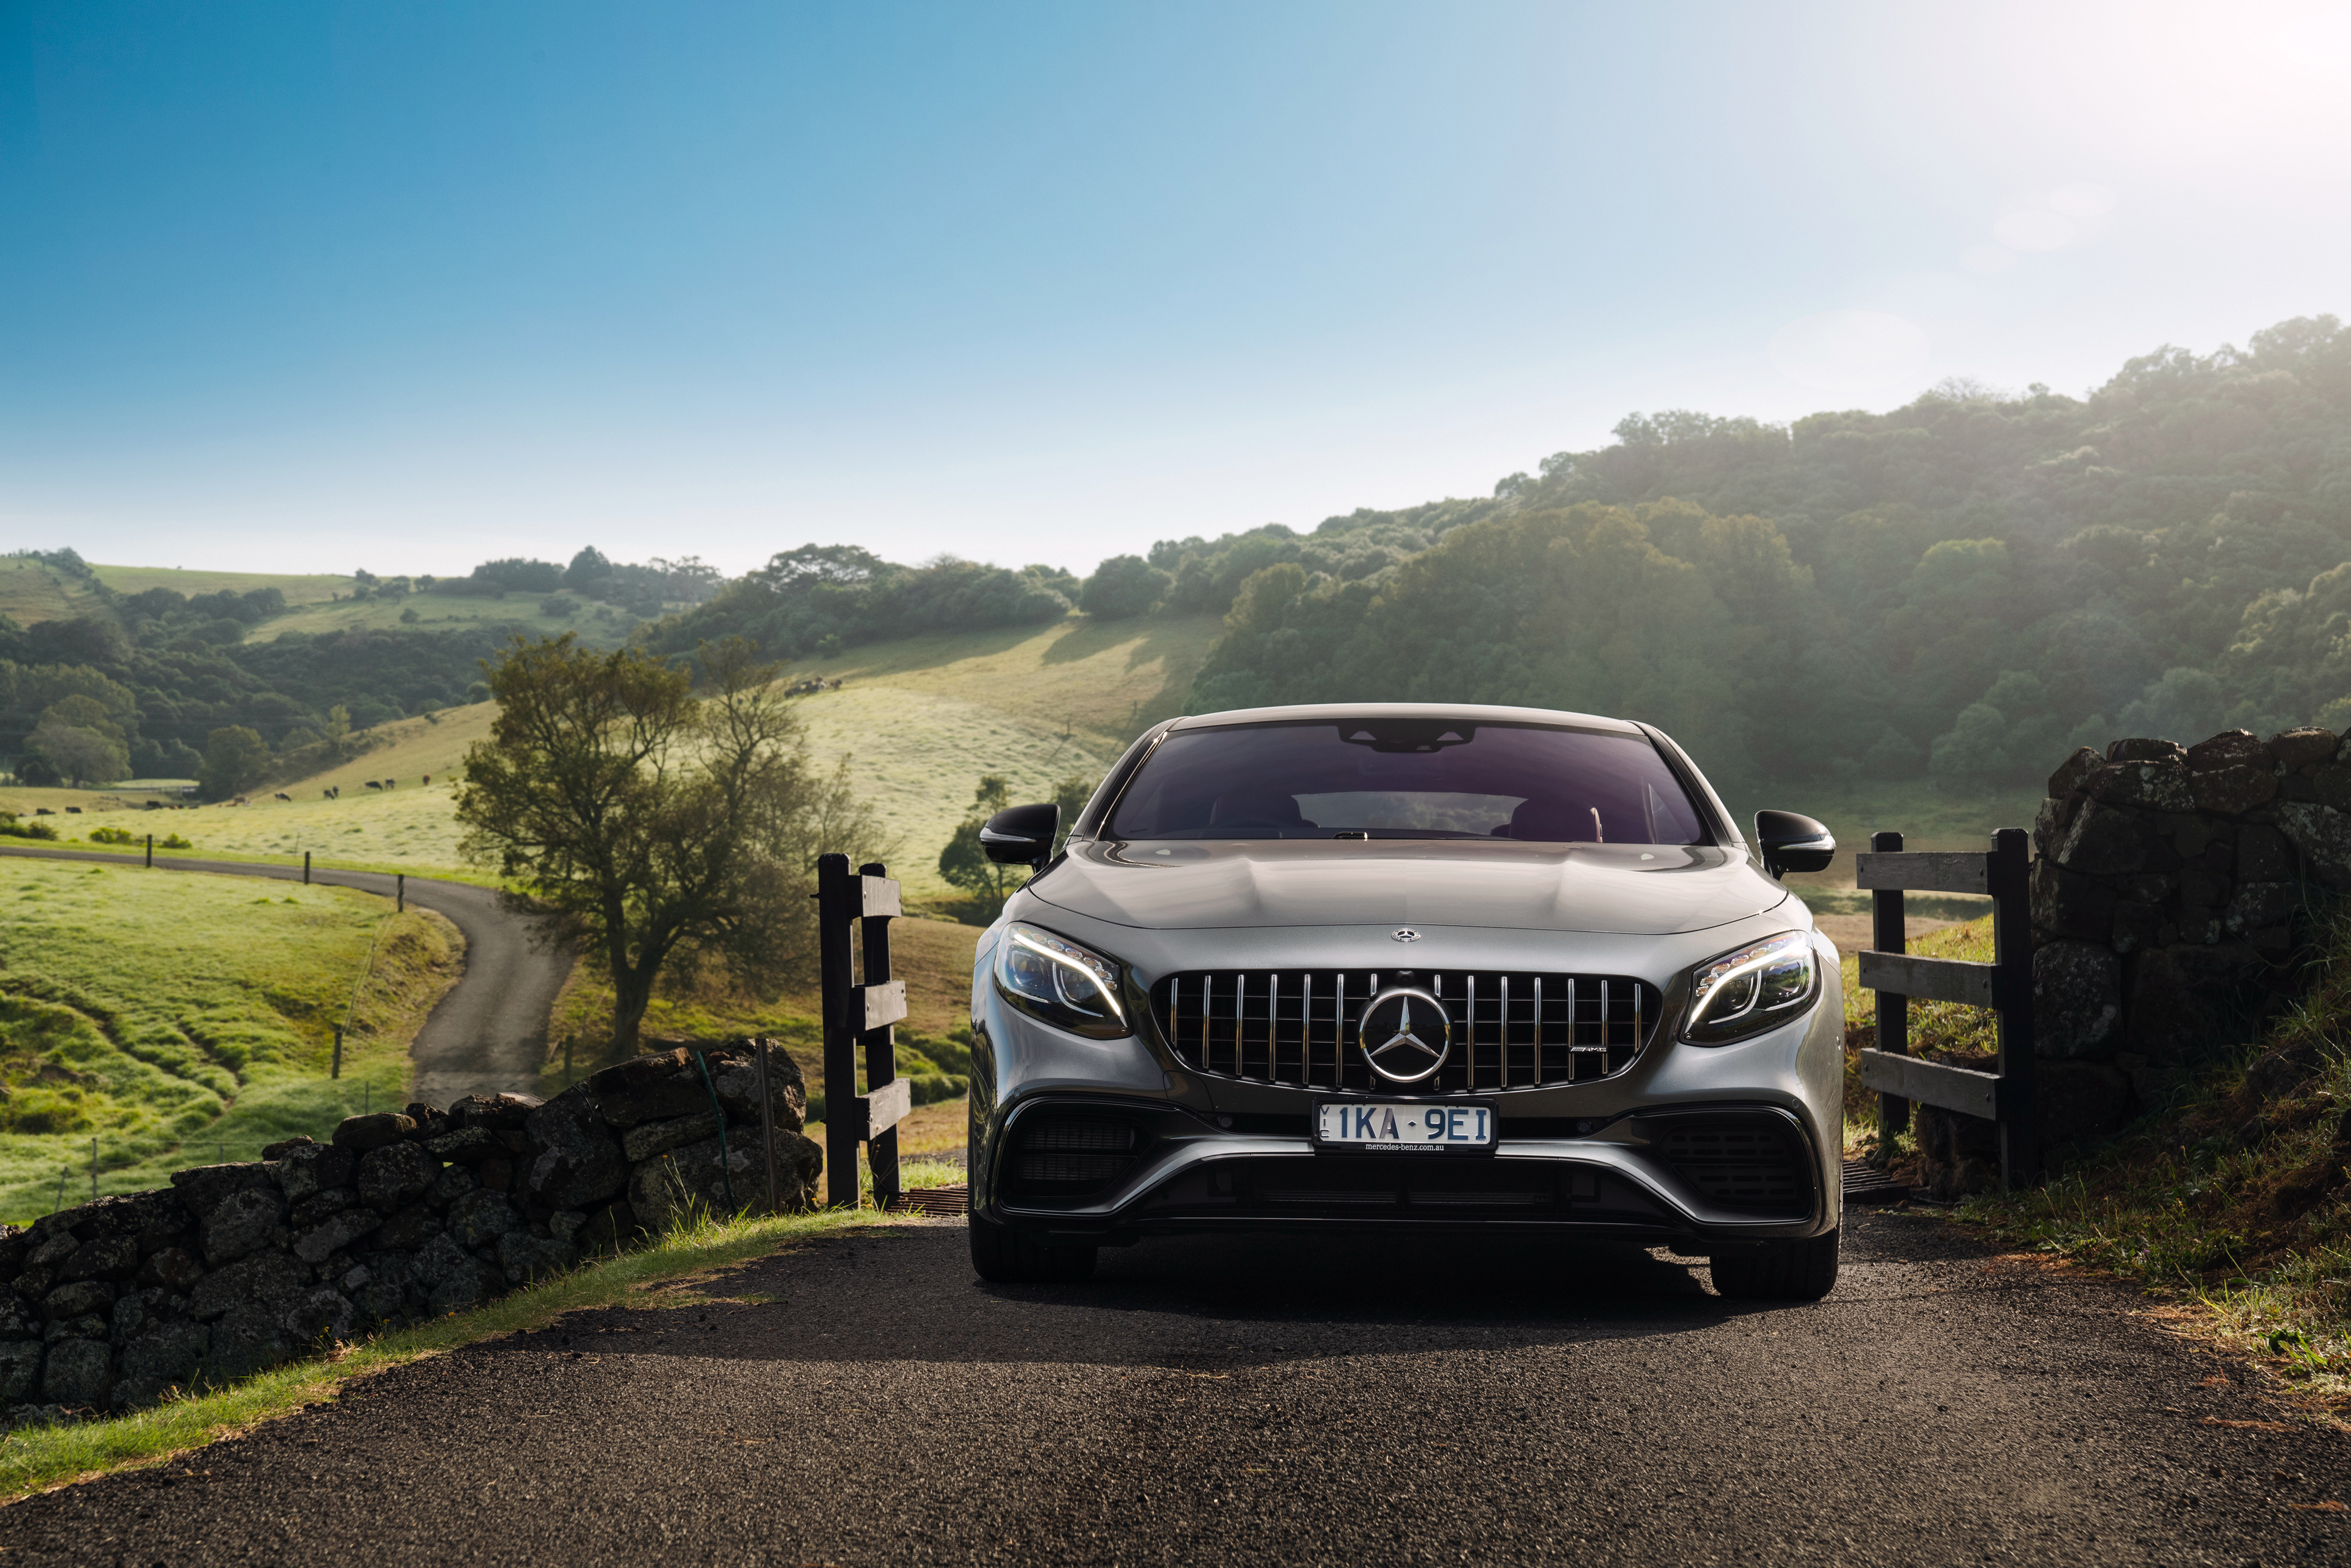 Mercedes AMG S63 2018, HD Cars, 4k Wallpapers, Images, Backgrounds ...